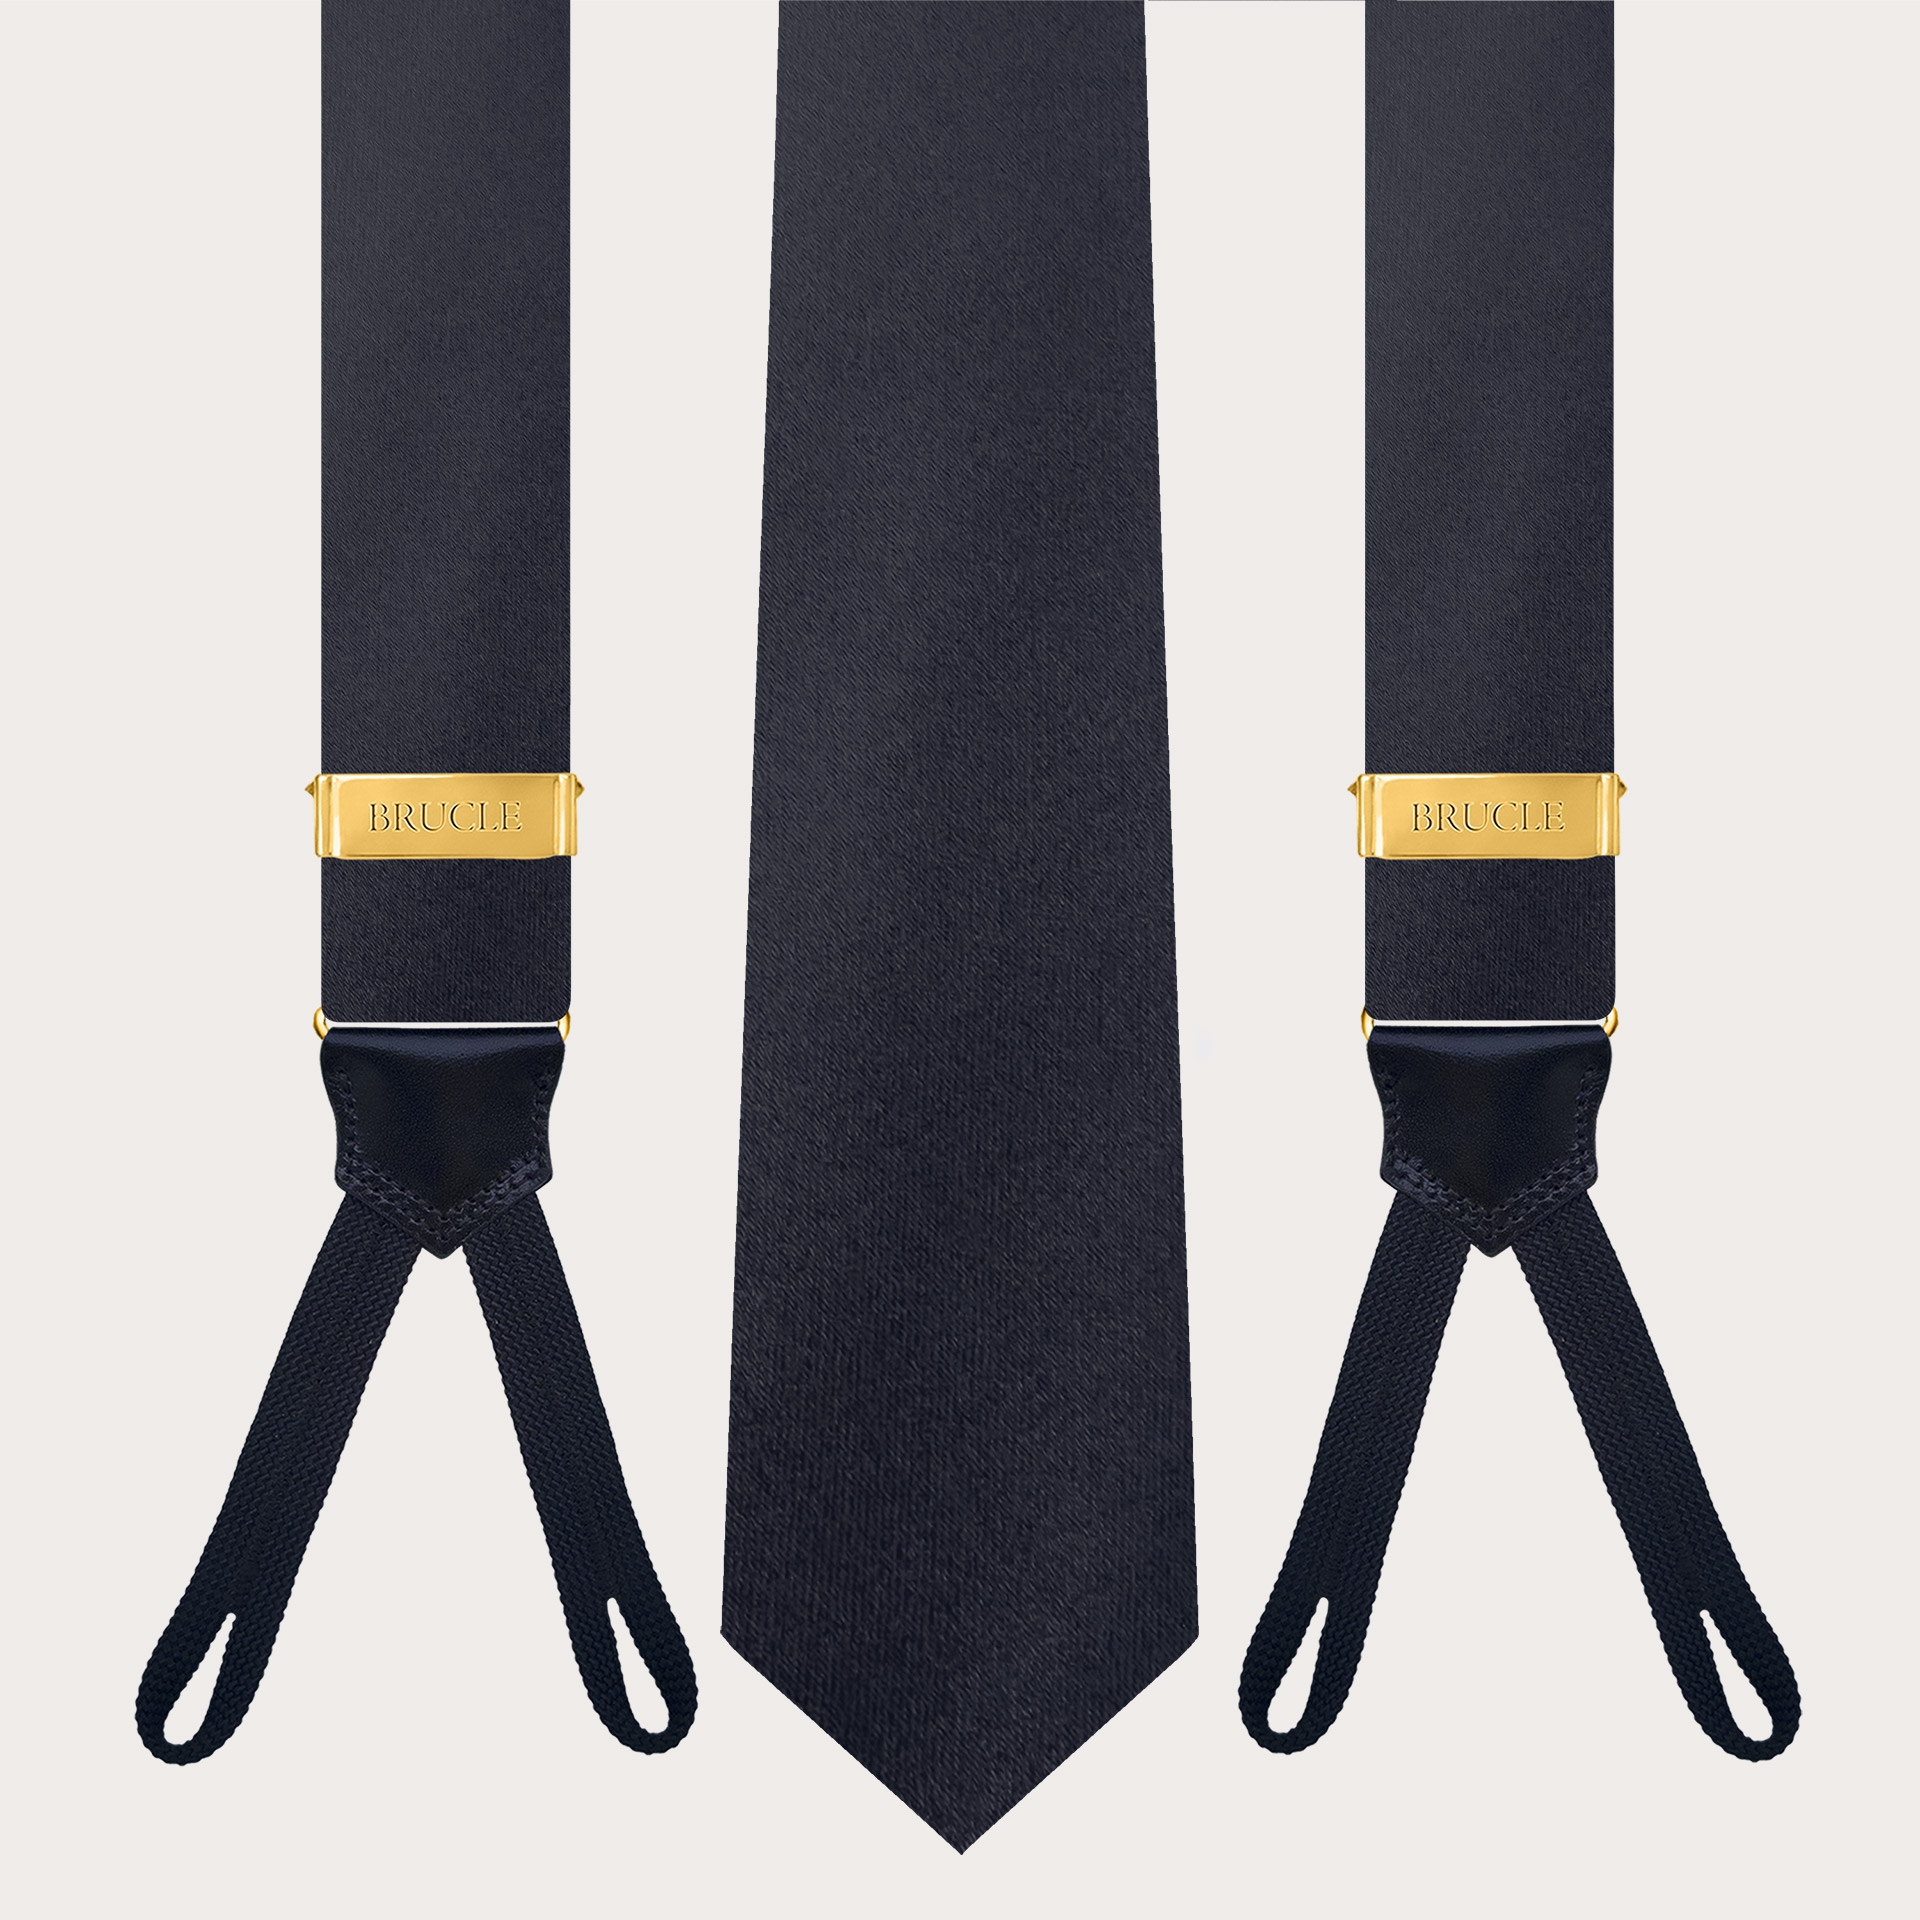 Coordinated set of button suspenders and navy blue silk satin tie